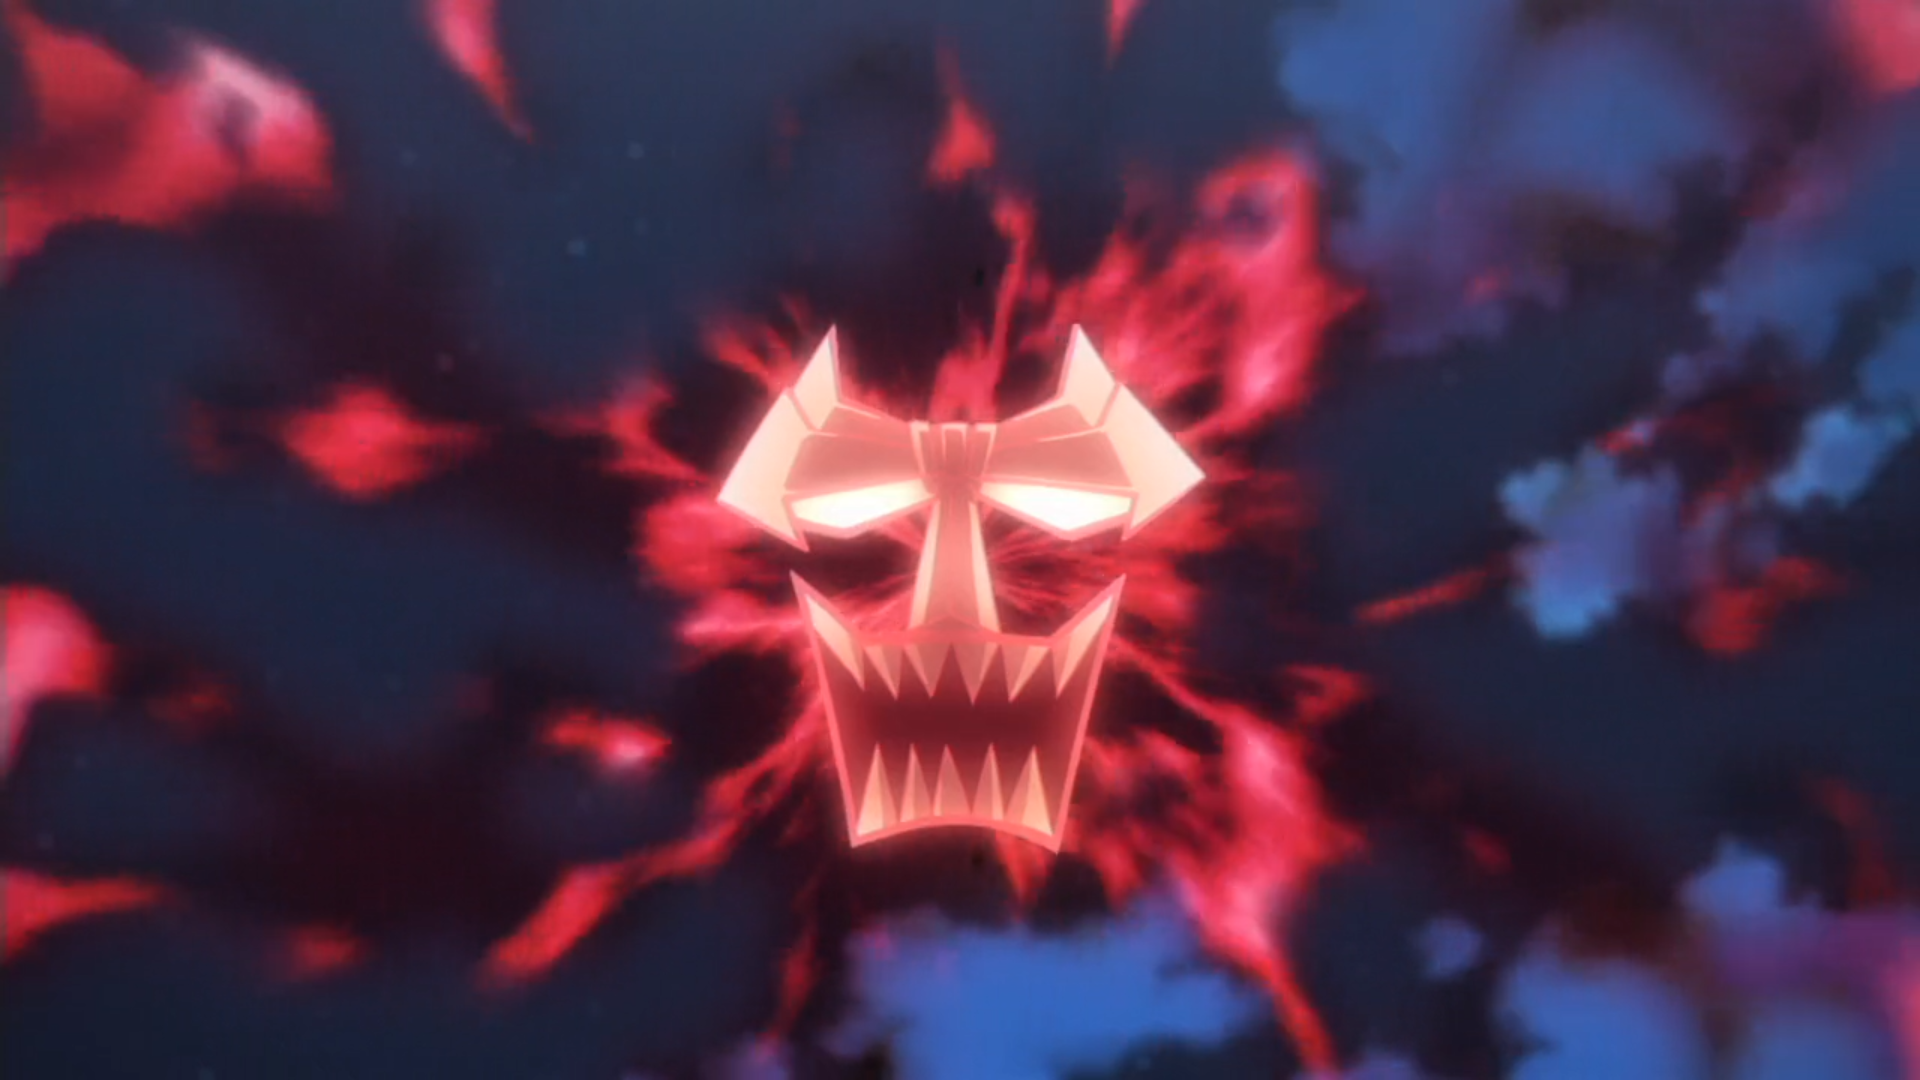 http://static4.wikia.nocookie.net/__cb20120126184957/beyblade/images/4/41/Orion_Beast.png